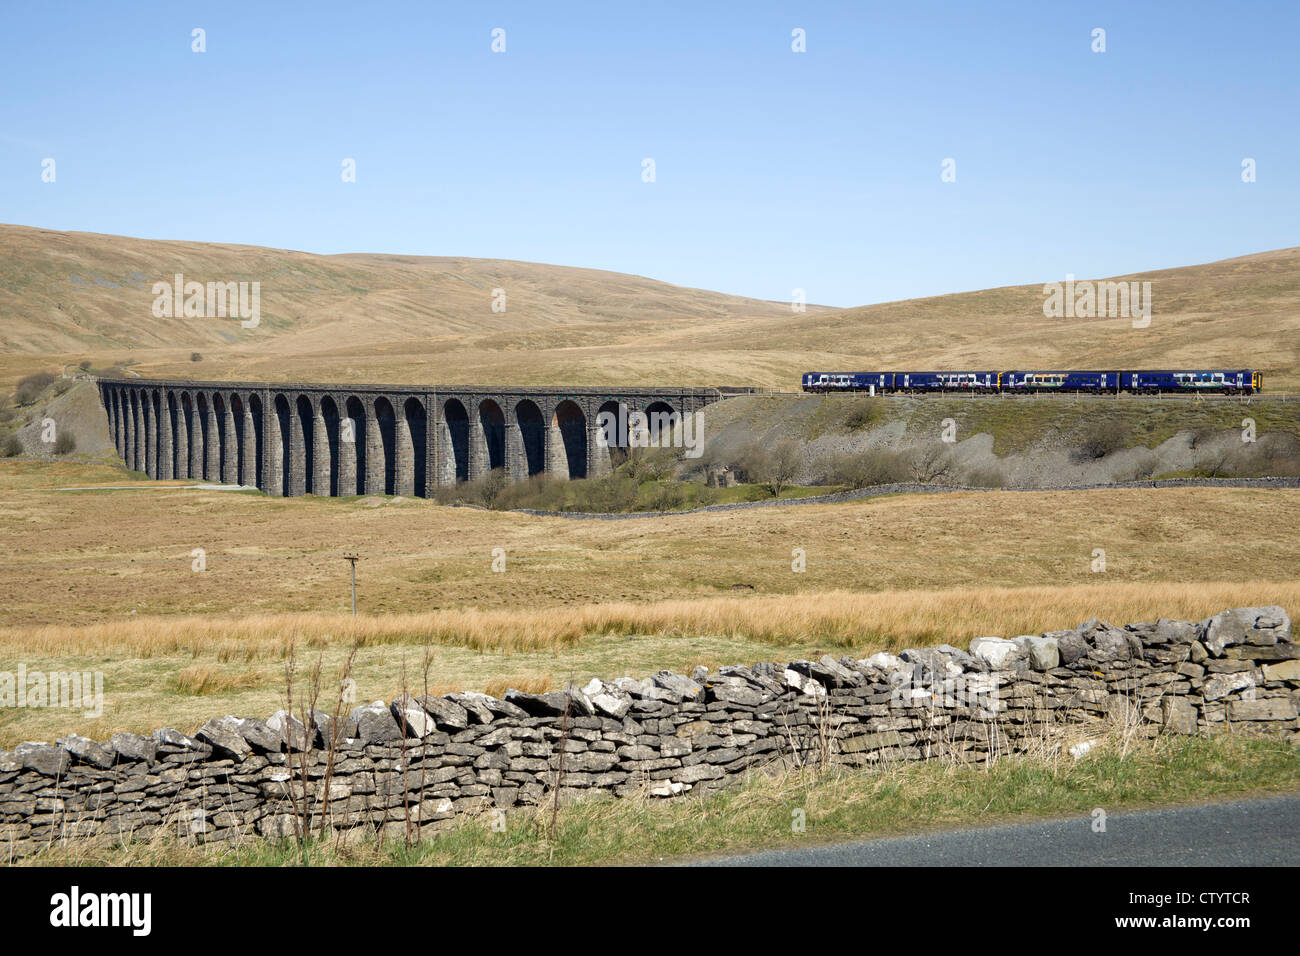 Northern Rail train crossing the famous Ribblehead viaduct on the Settle and Carlilse railway line, Ribblehead, North Yorkshire. Stock Photo